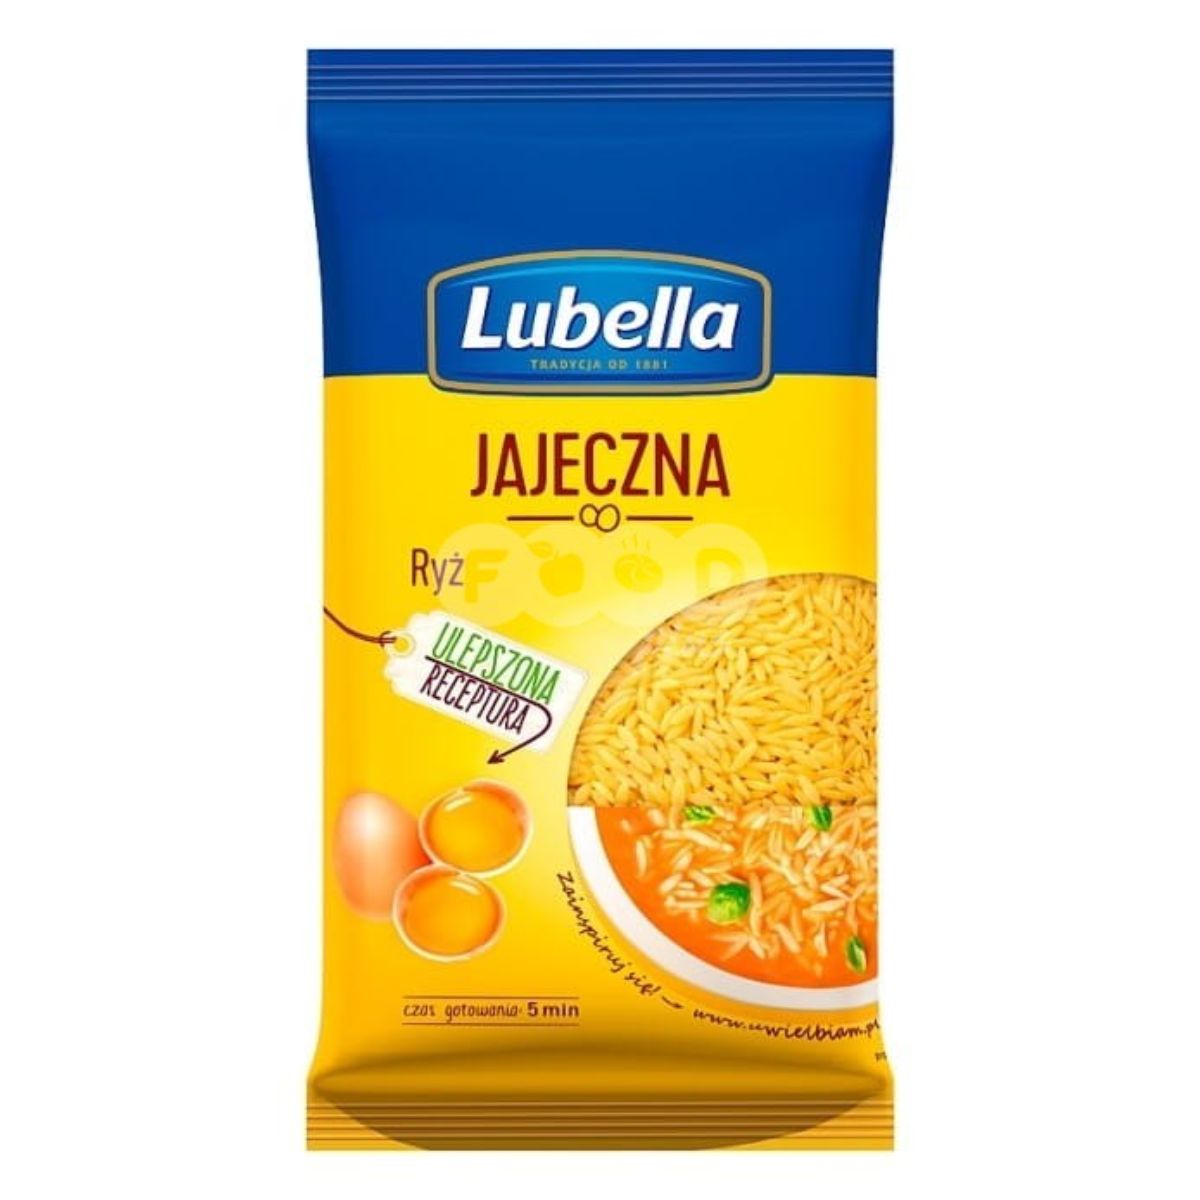 A package of Lubella - Jajeczna Pasta - 250g noodles, featuring images of eggs and a bowl of noodle soup, with Polish text.